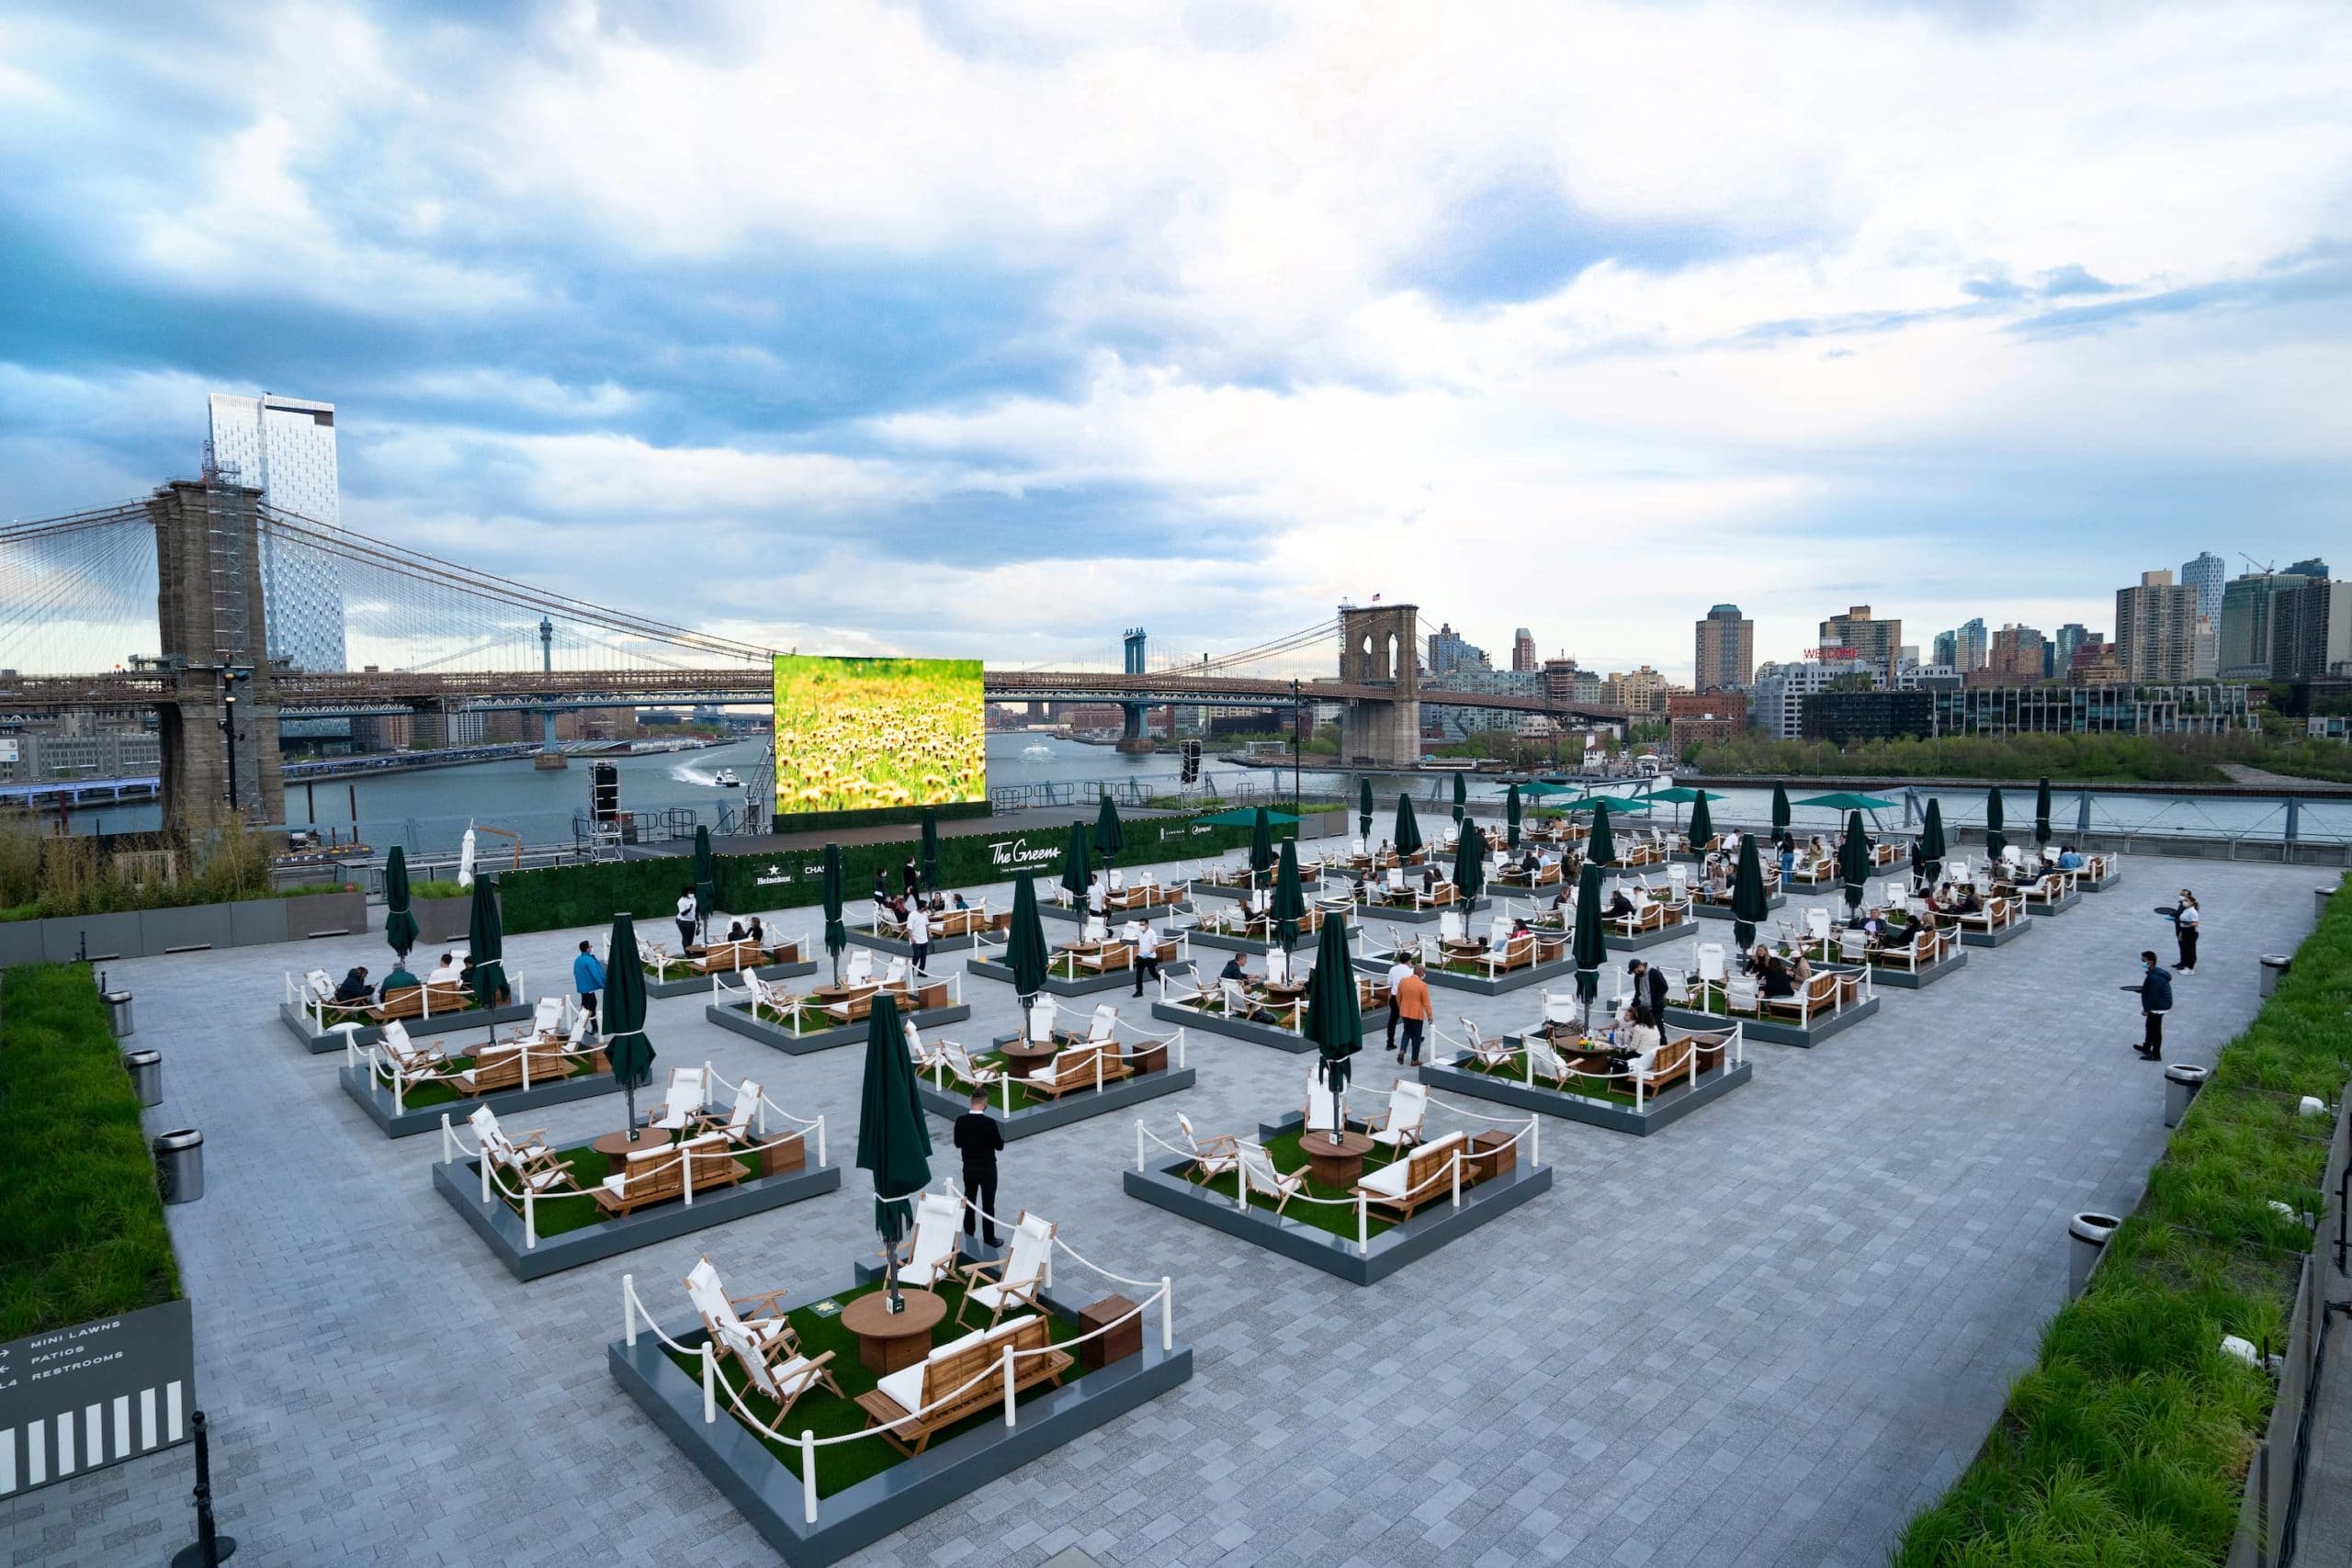 Plan a Socially Distanced Event on The Rooftop at Pier 17